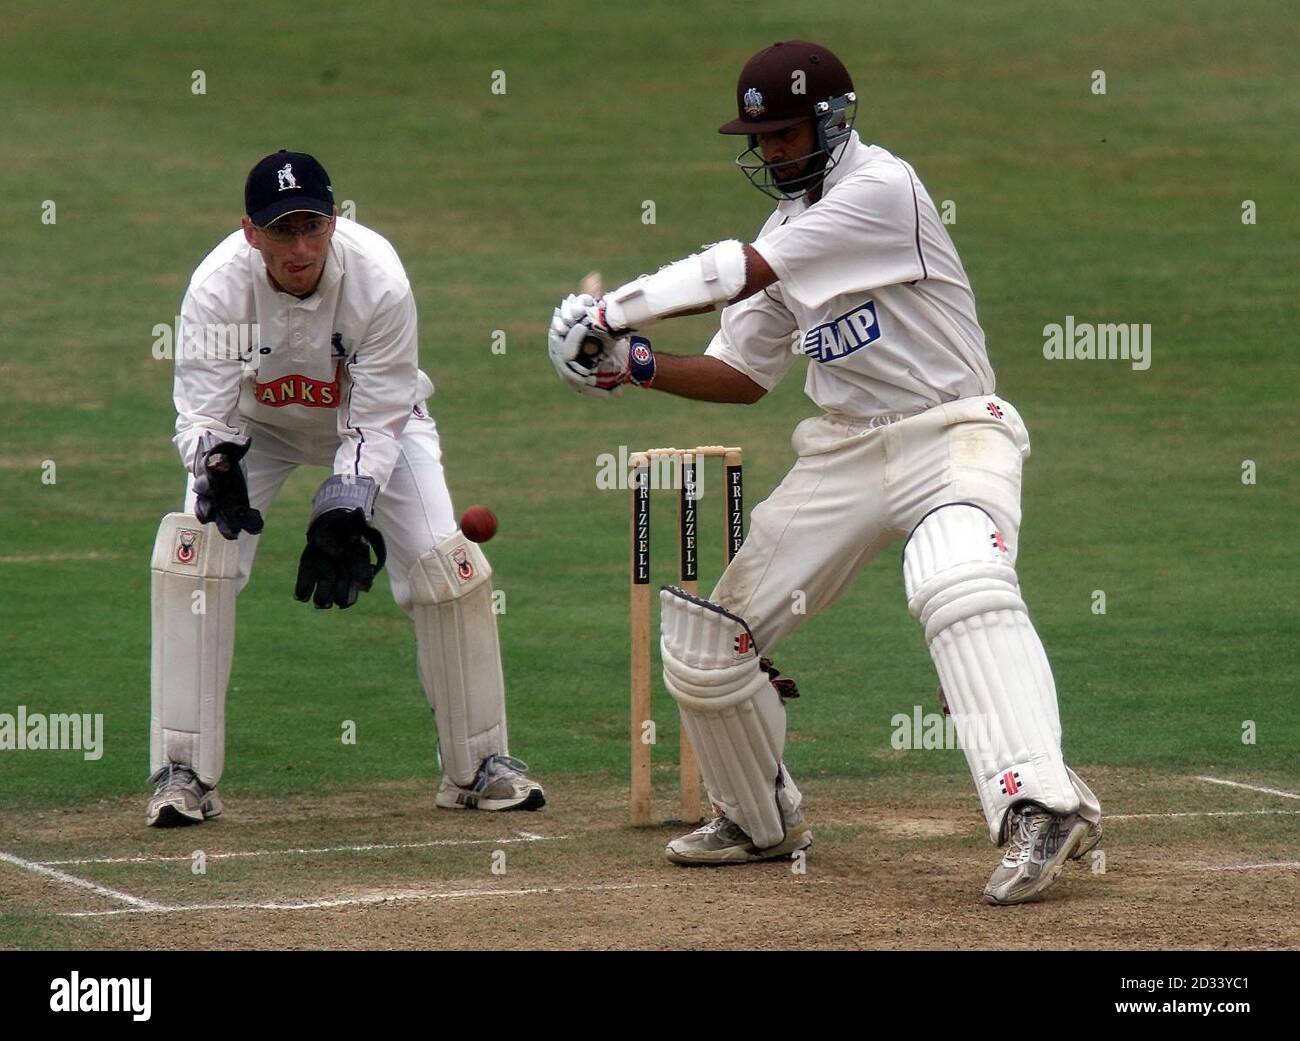 Surrey batsman Nadeem Shahid square cuts a delivery from Warwickshire's Ashley Giles during the Frizzell County Championship match at Edgbaston, Birmingham. Stock Photo